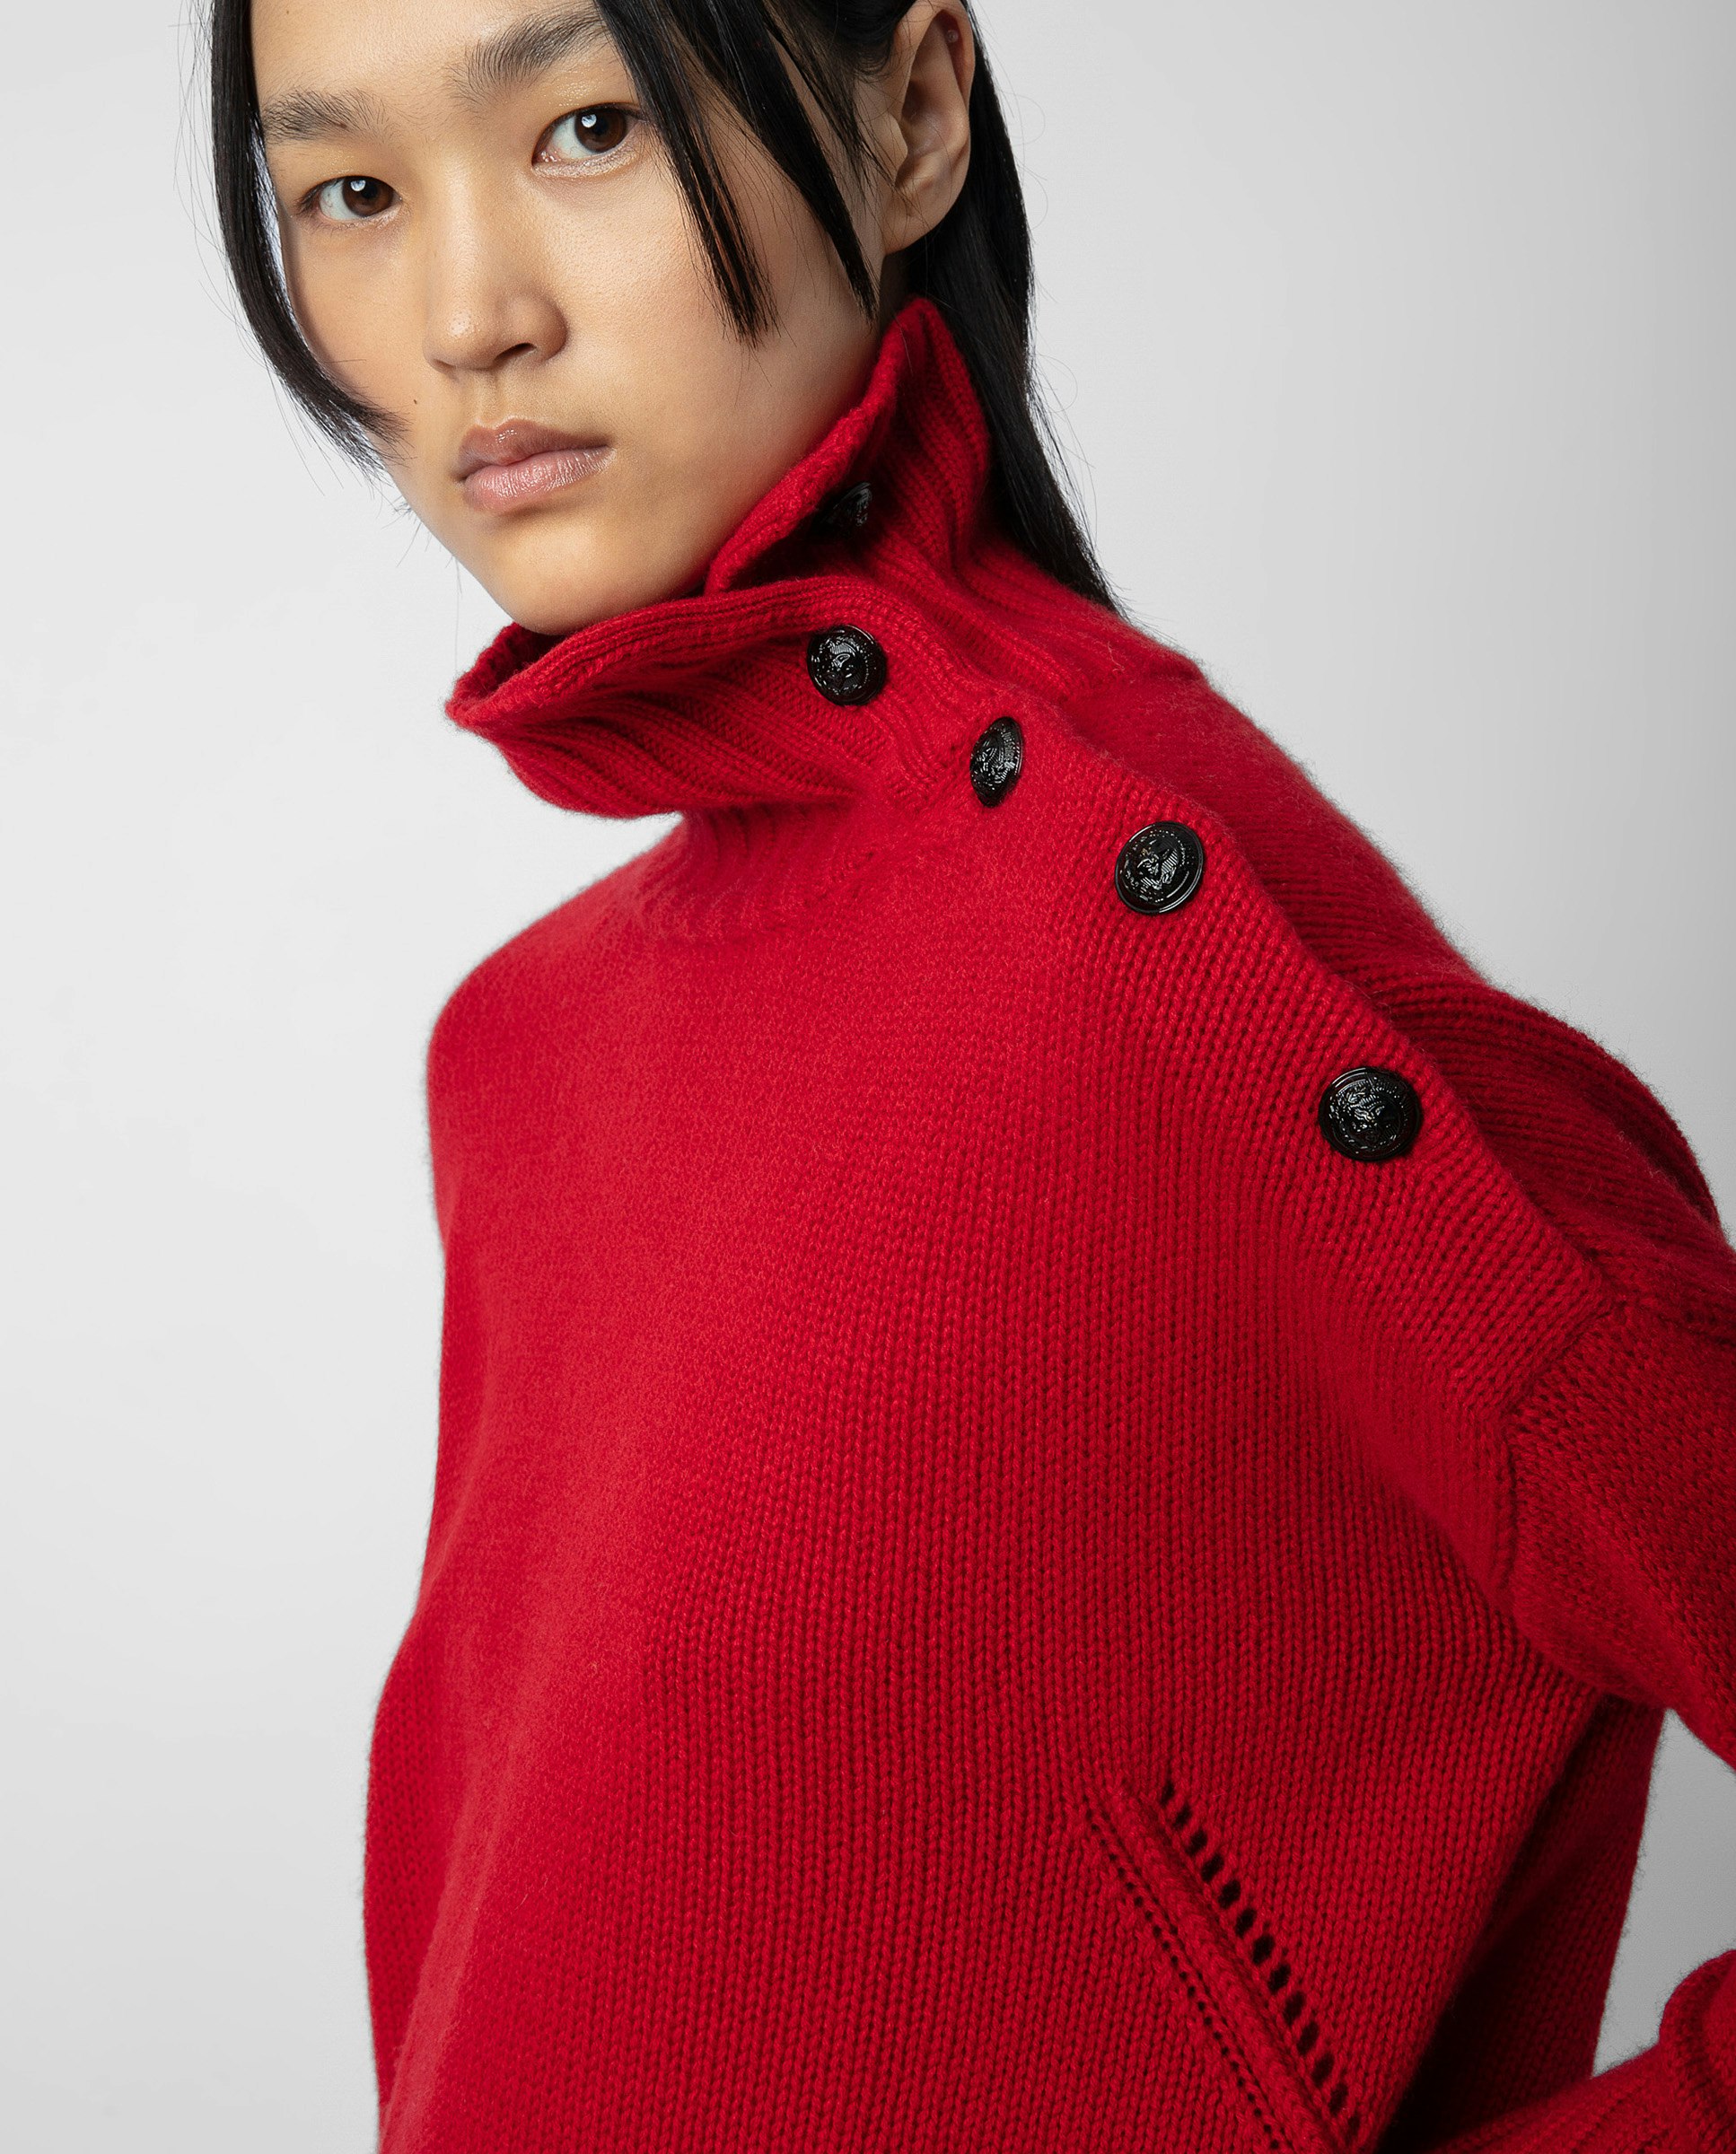 Alma カシミヤニット - Women’s red cashmere jumper with mock neckline and buttons on the shoulders